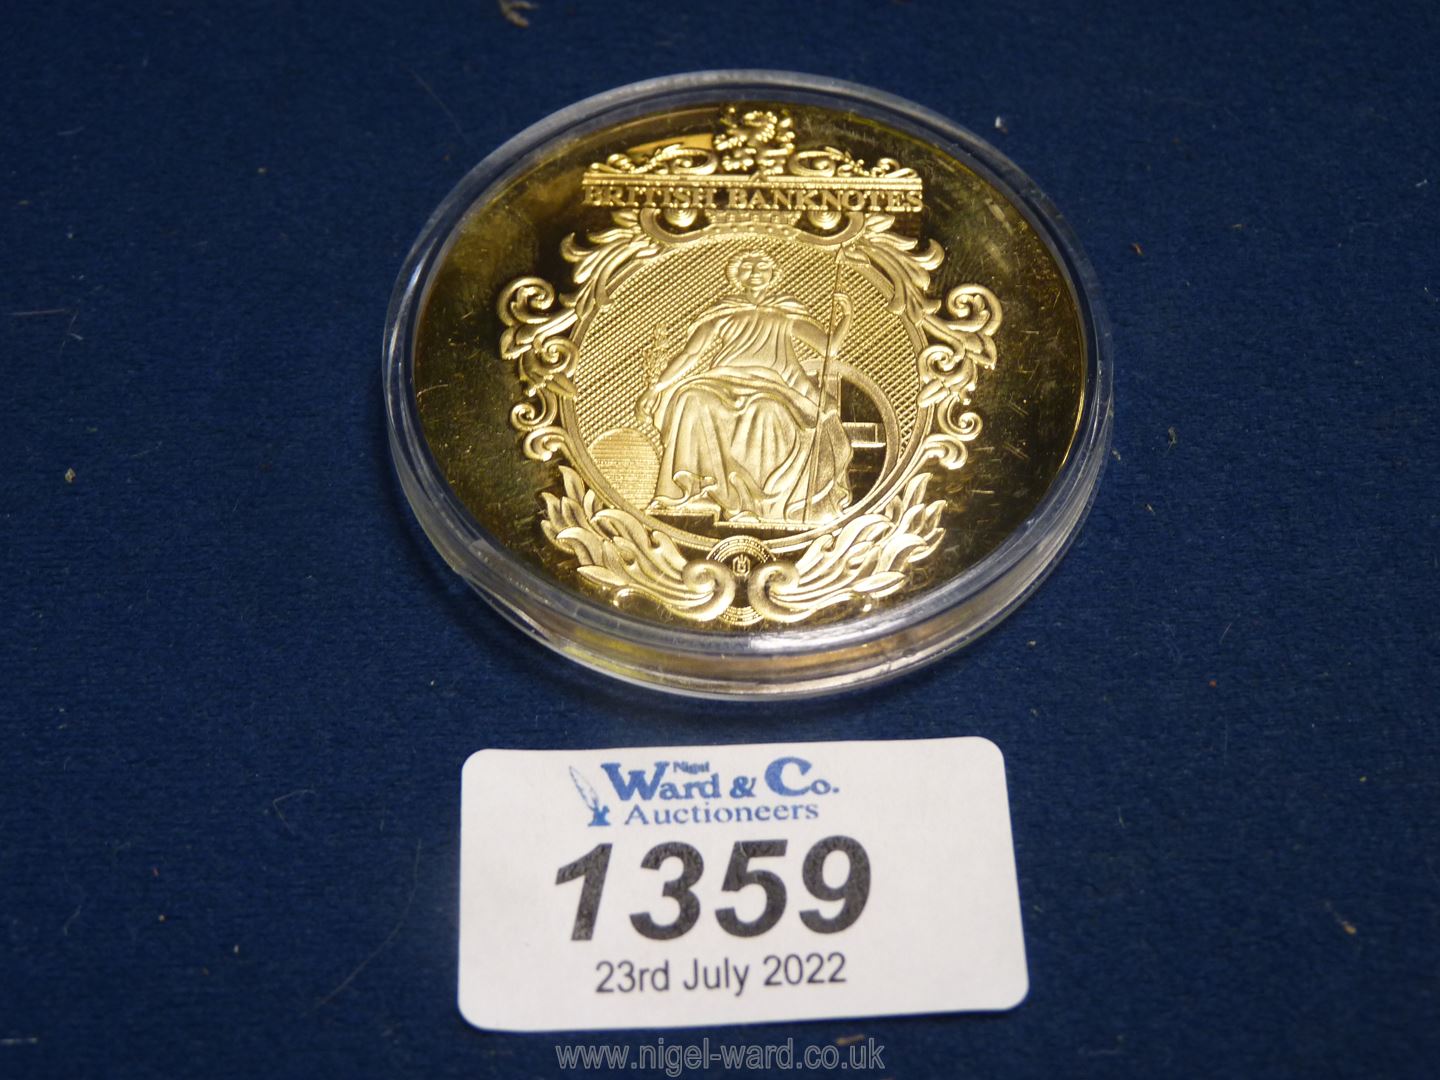 A "Windsor Mint" £5 bank-note Coin, gold plated, commemorating 1793 - 1957.